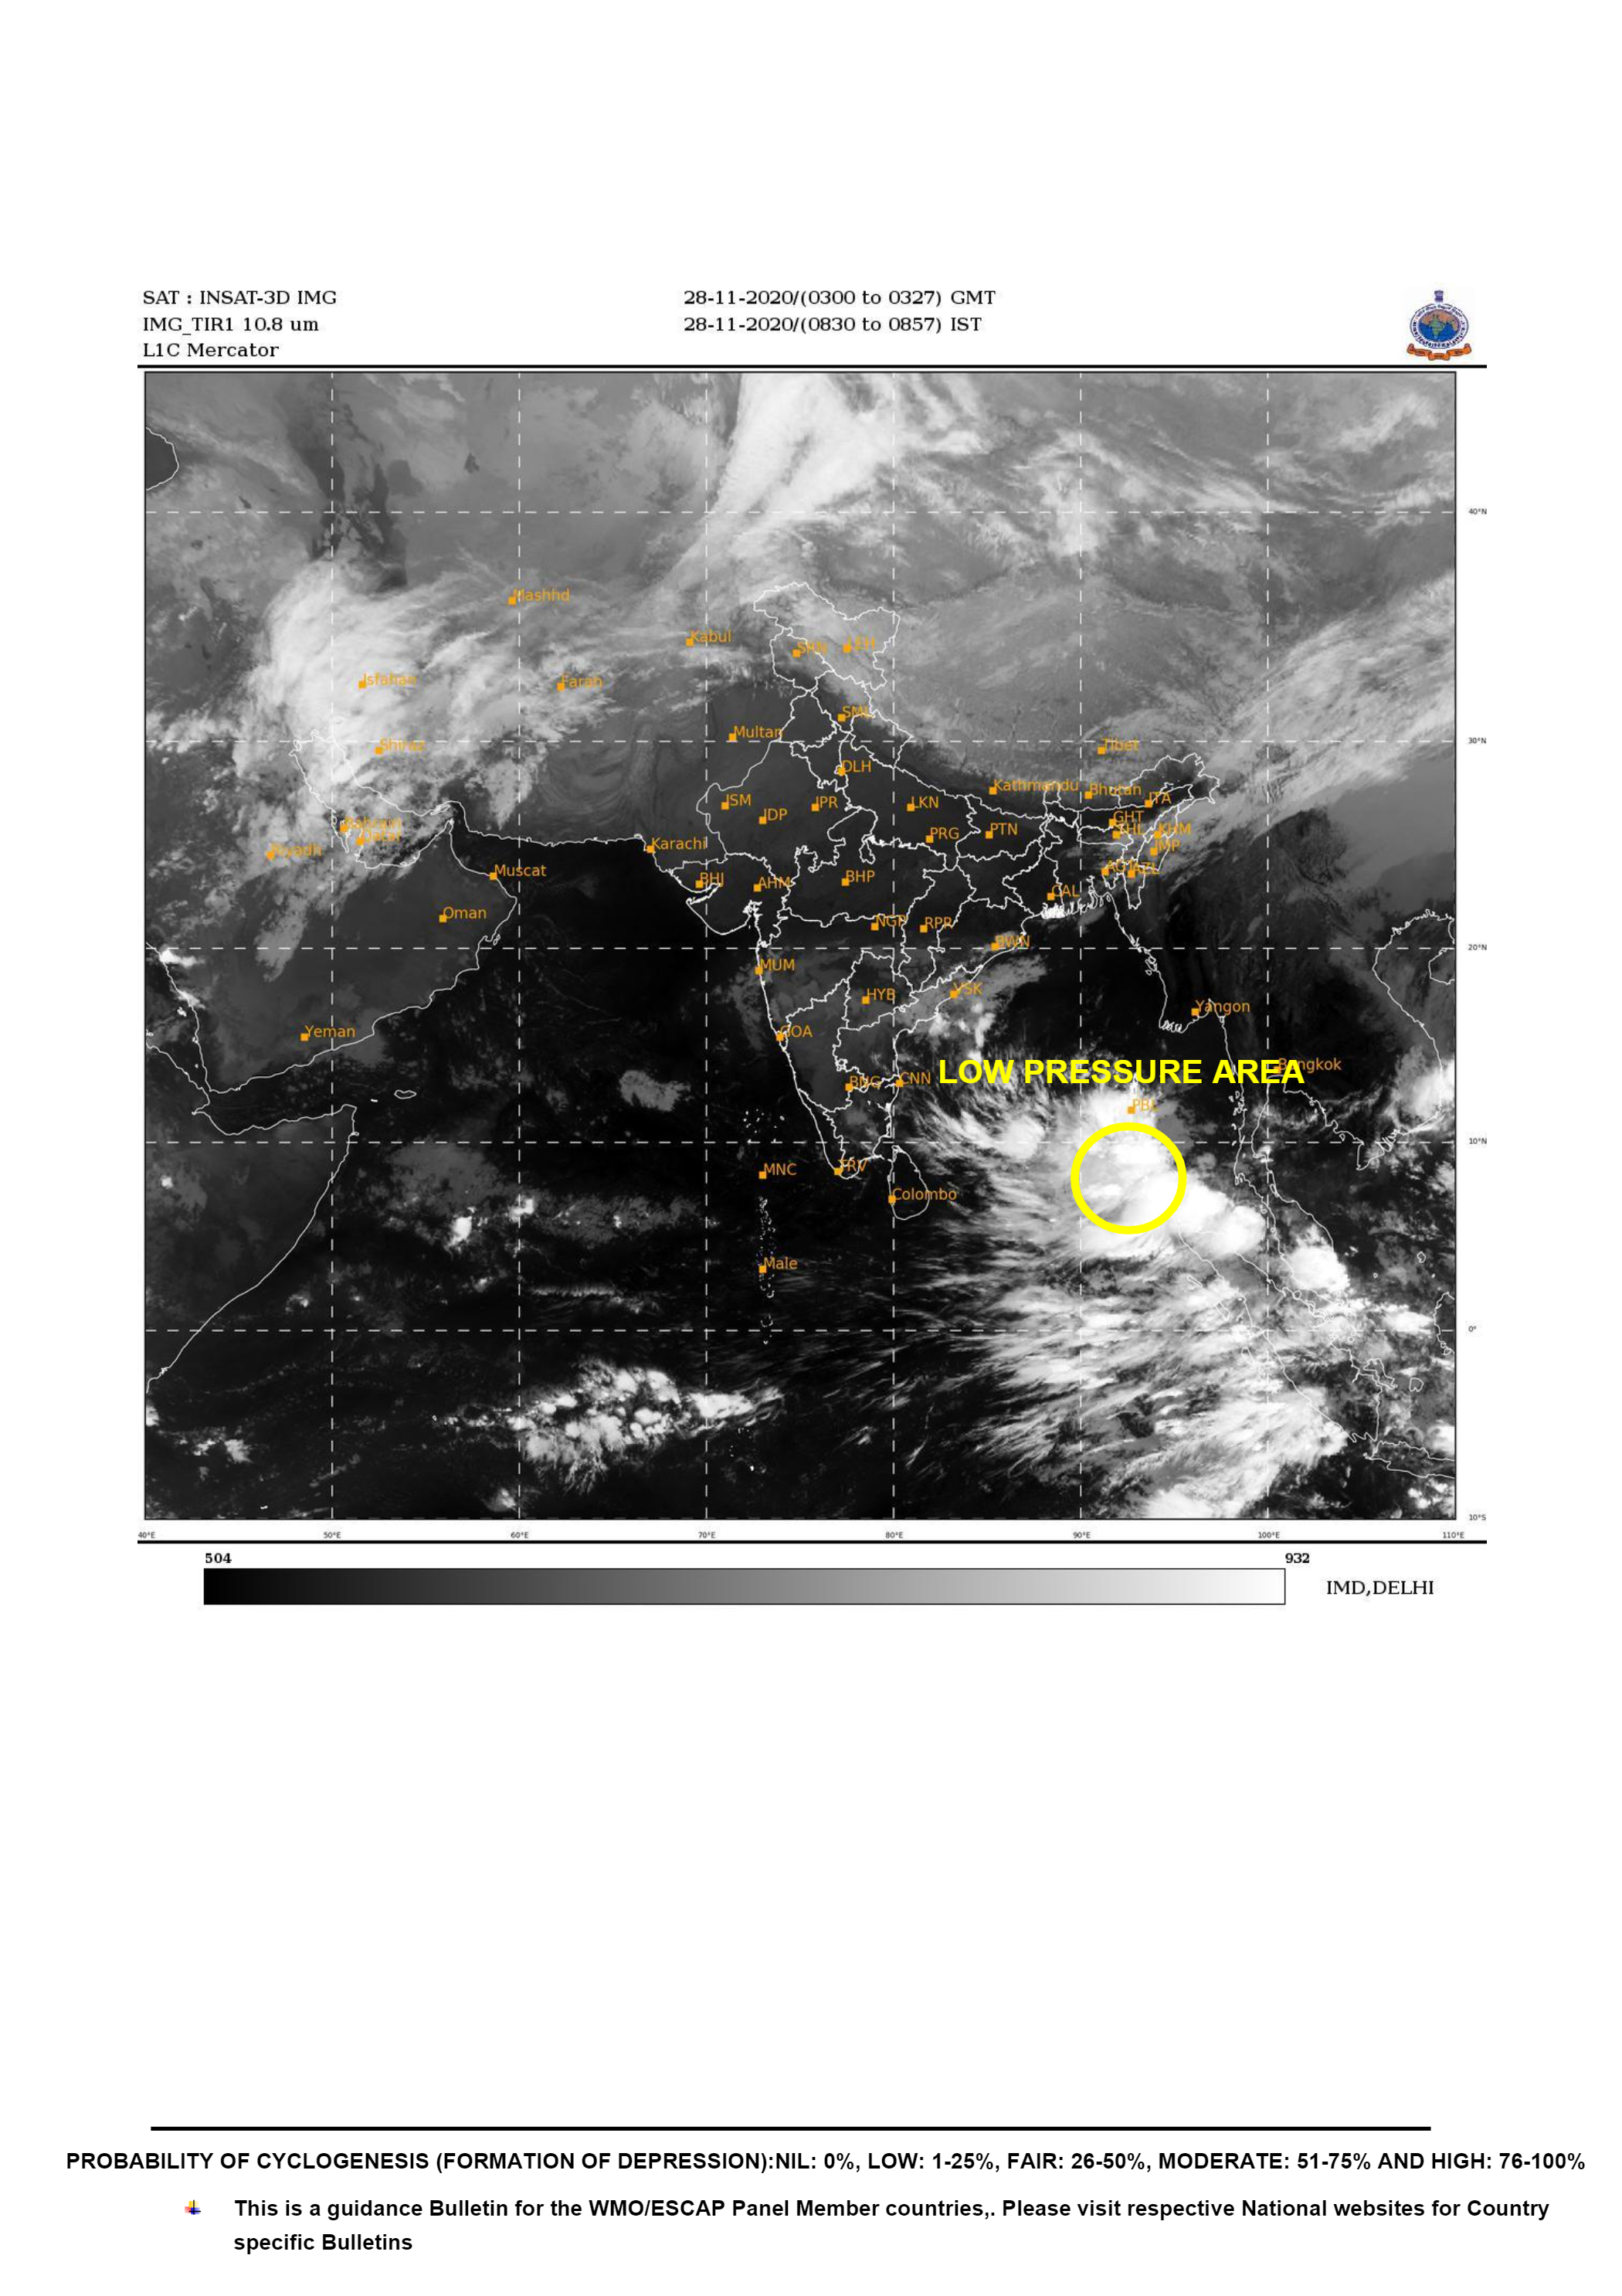 2_Tropical Weather Outlook based on  0300 UTC of 28.11.2020_5fc1fc2a246bc.png